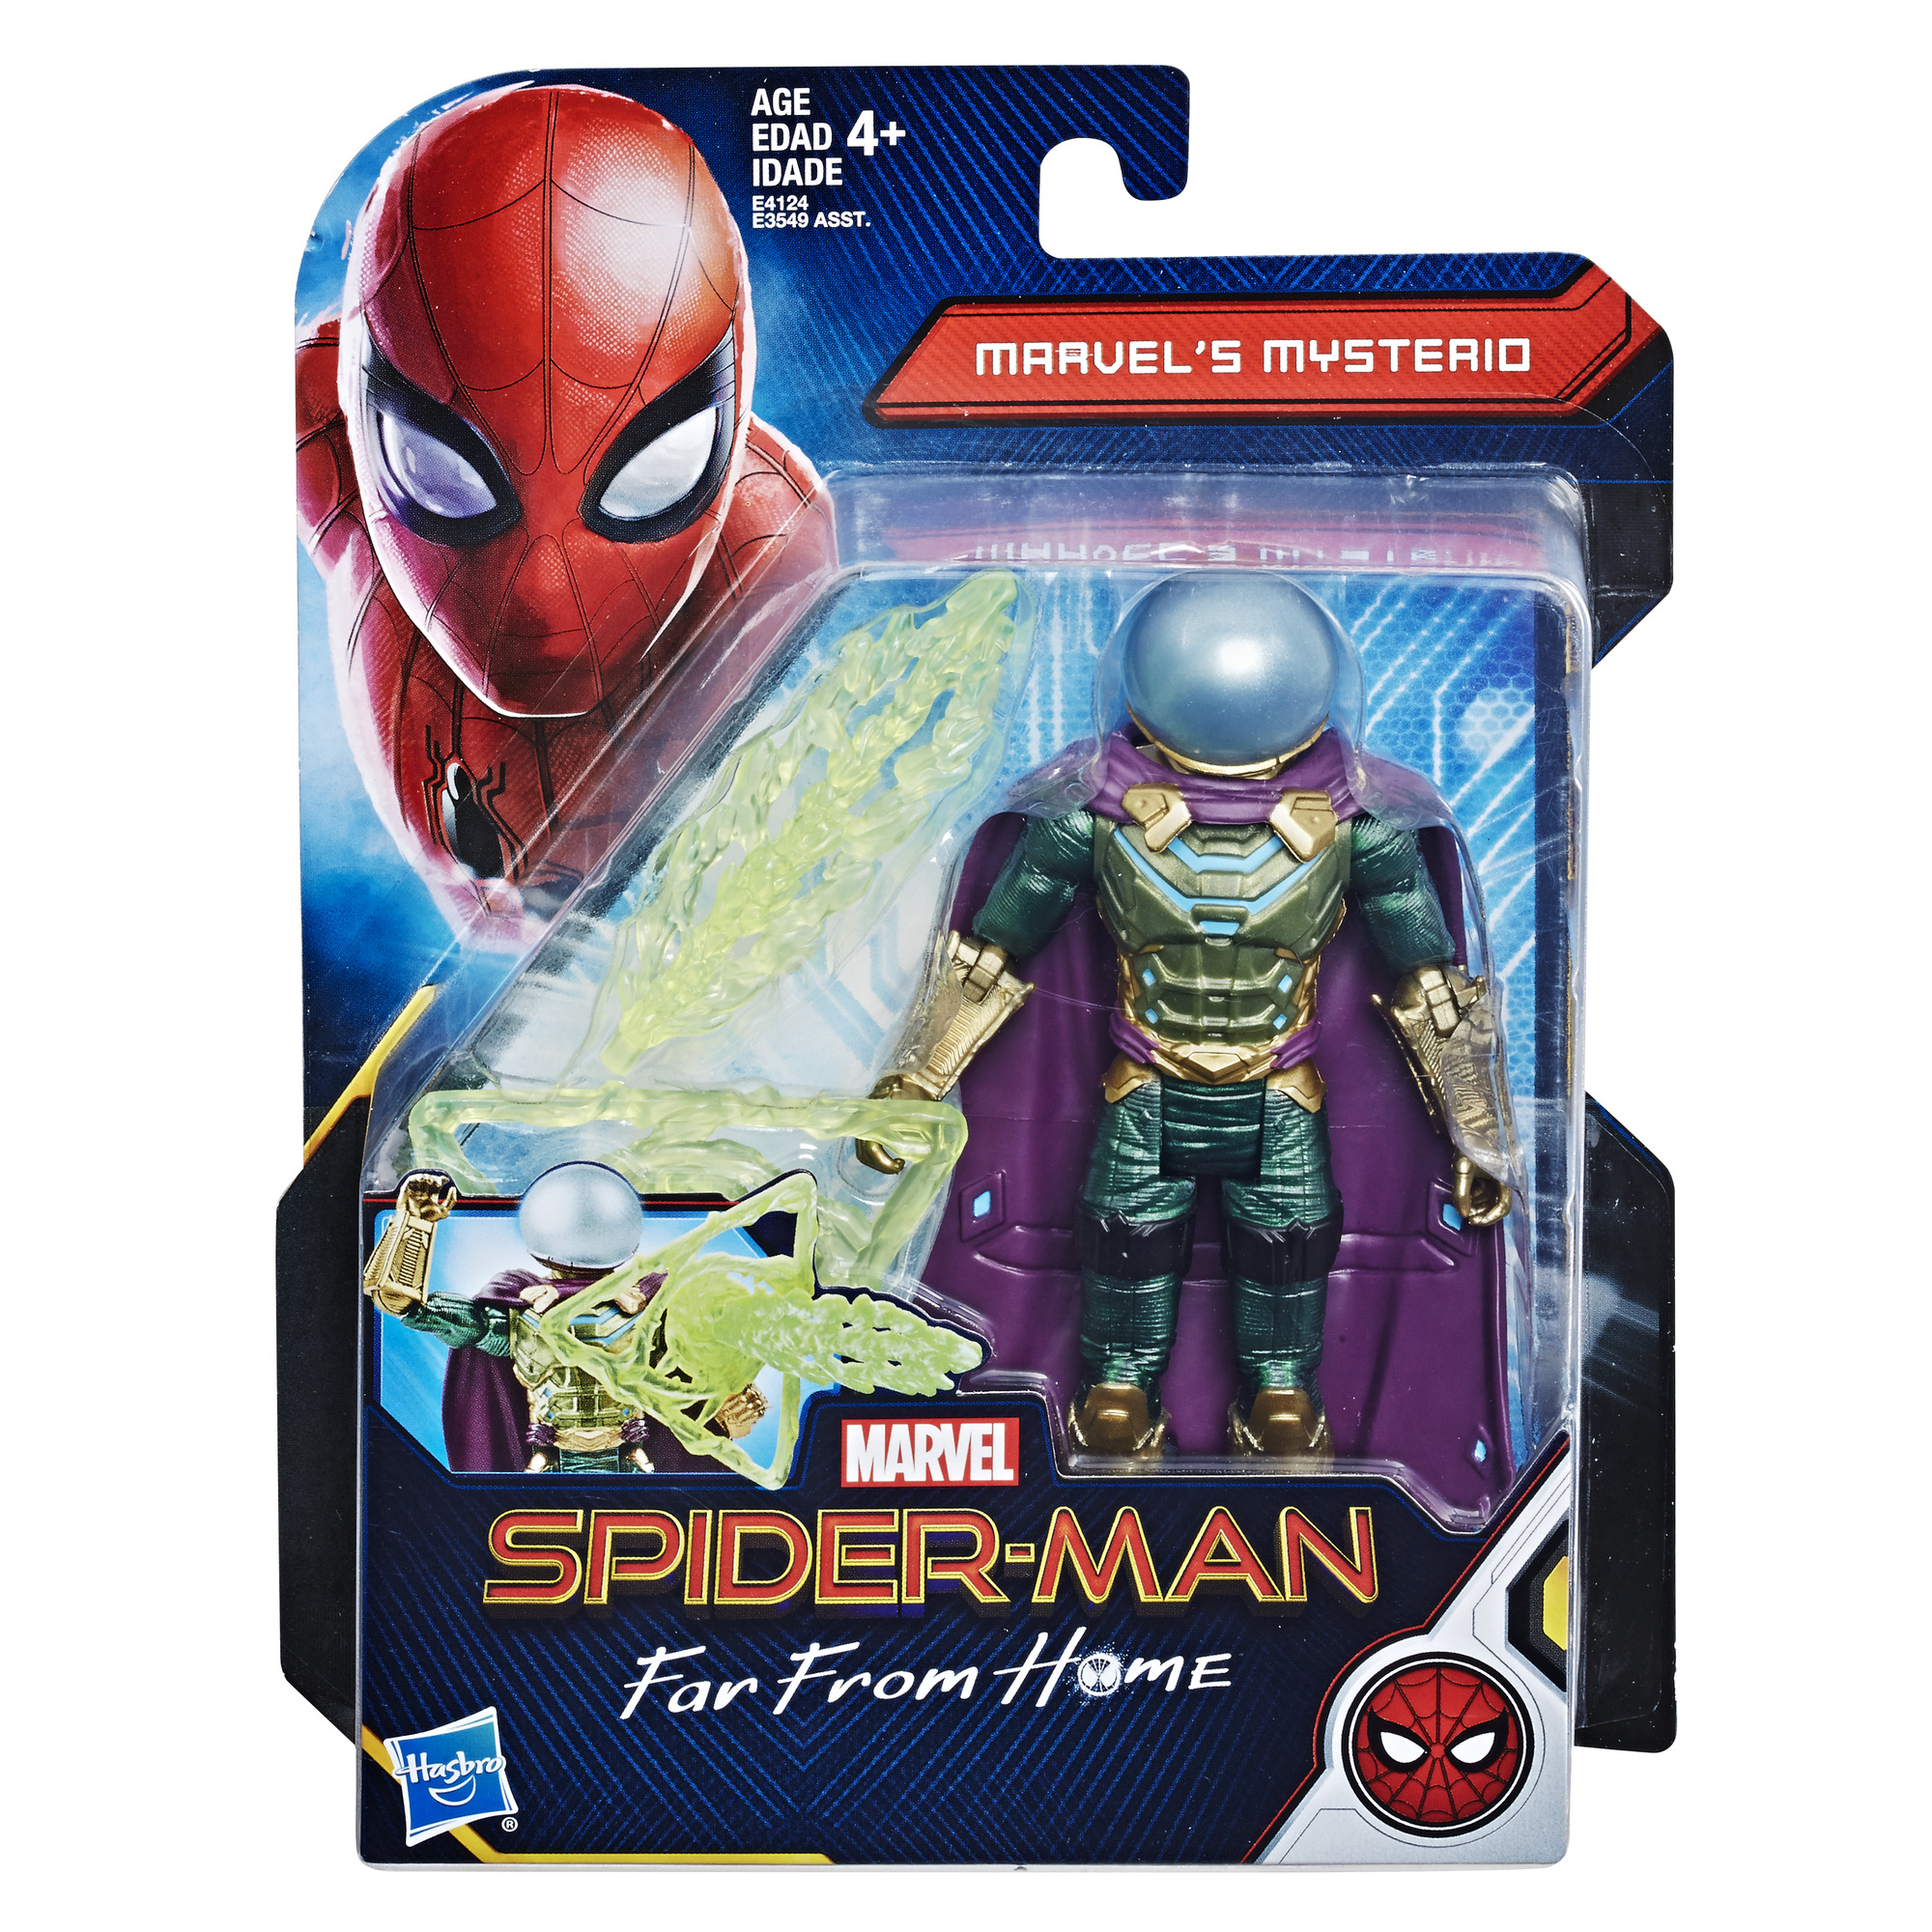 Spider-Man: Far From Home Marvel’s Mysterio 6-Inch Villain Figure - image 2 of 8